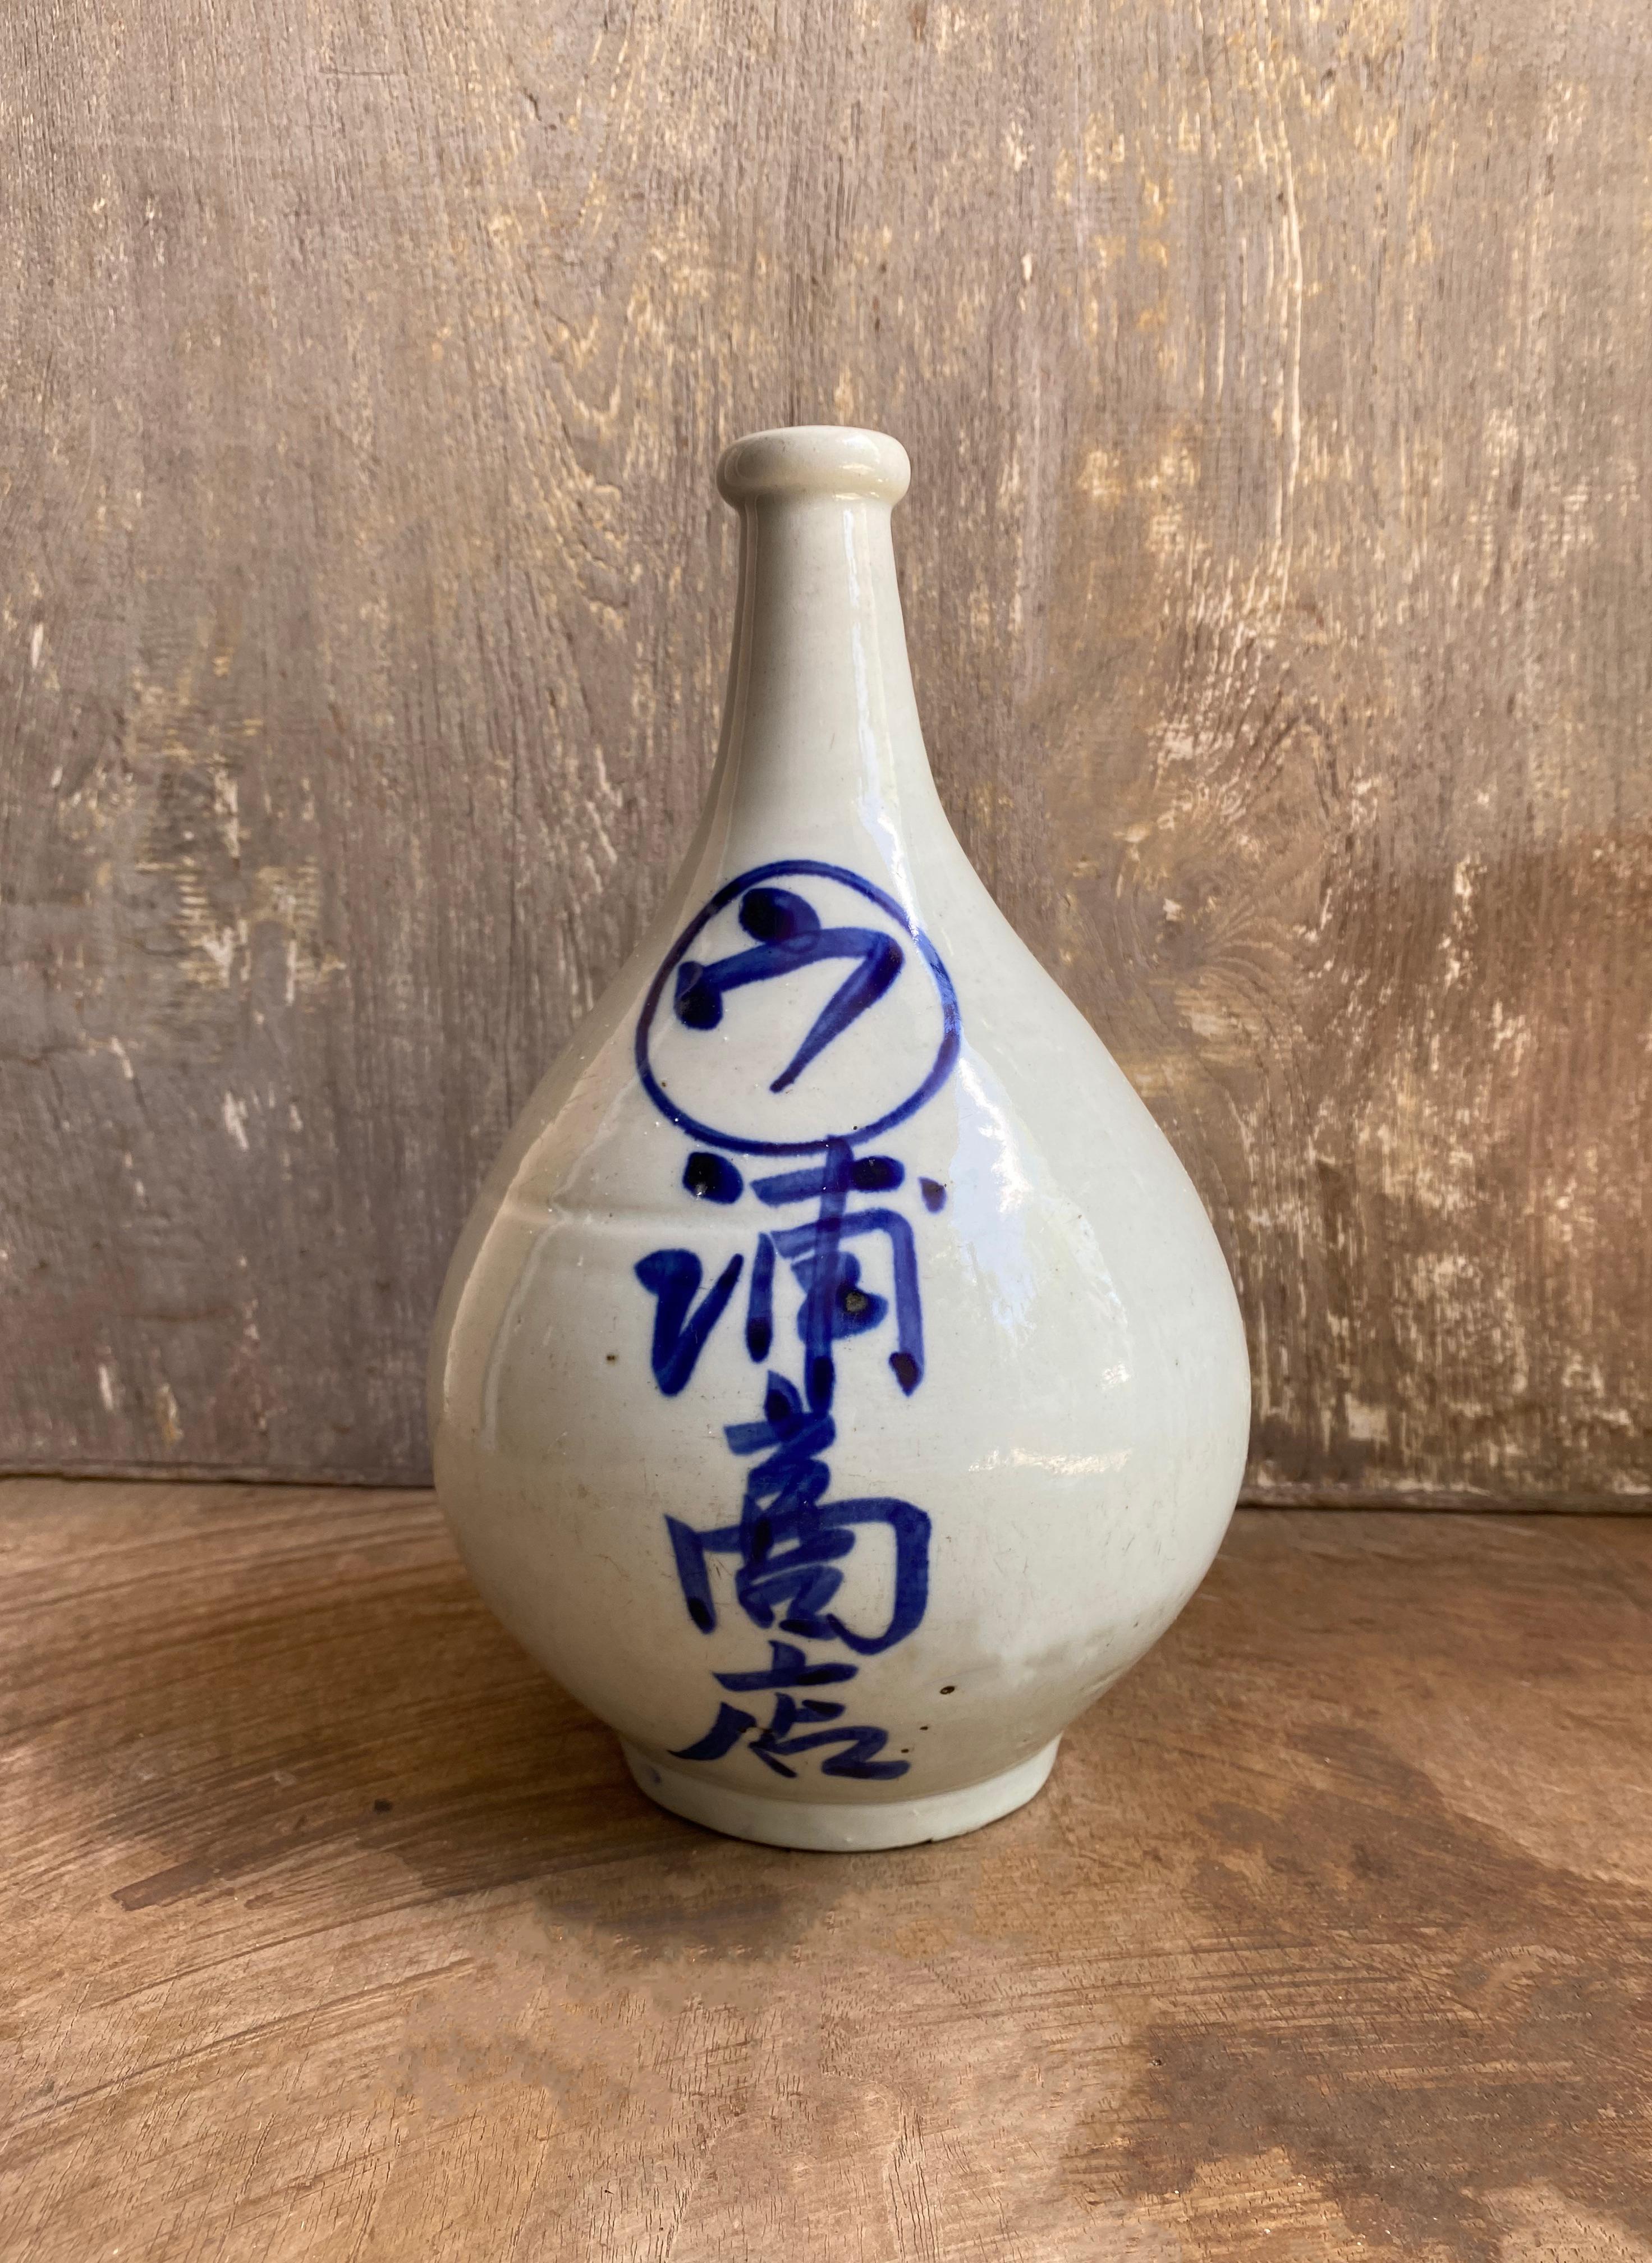 A Japanese ceramic Sake Jar from the early 20th century. The jar features glazed ceramic and hand-painted characters. 

Dimensions: Height 27cm x diameter 17cm.

 